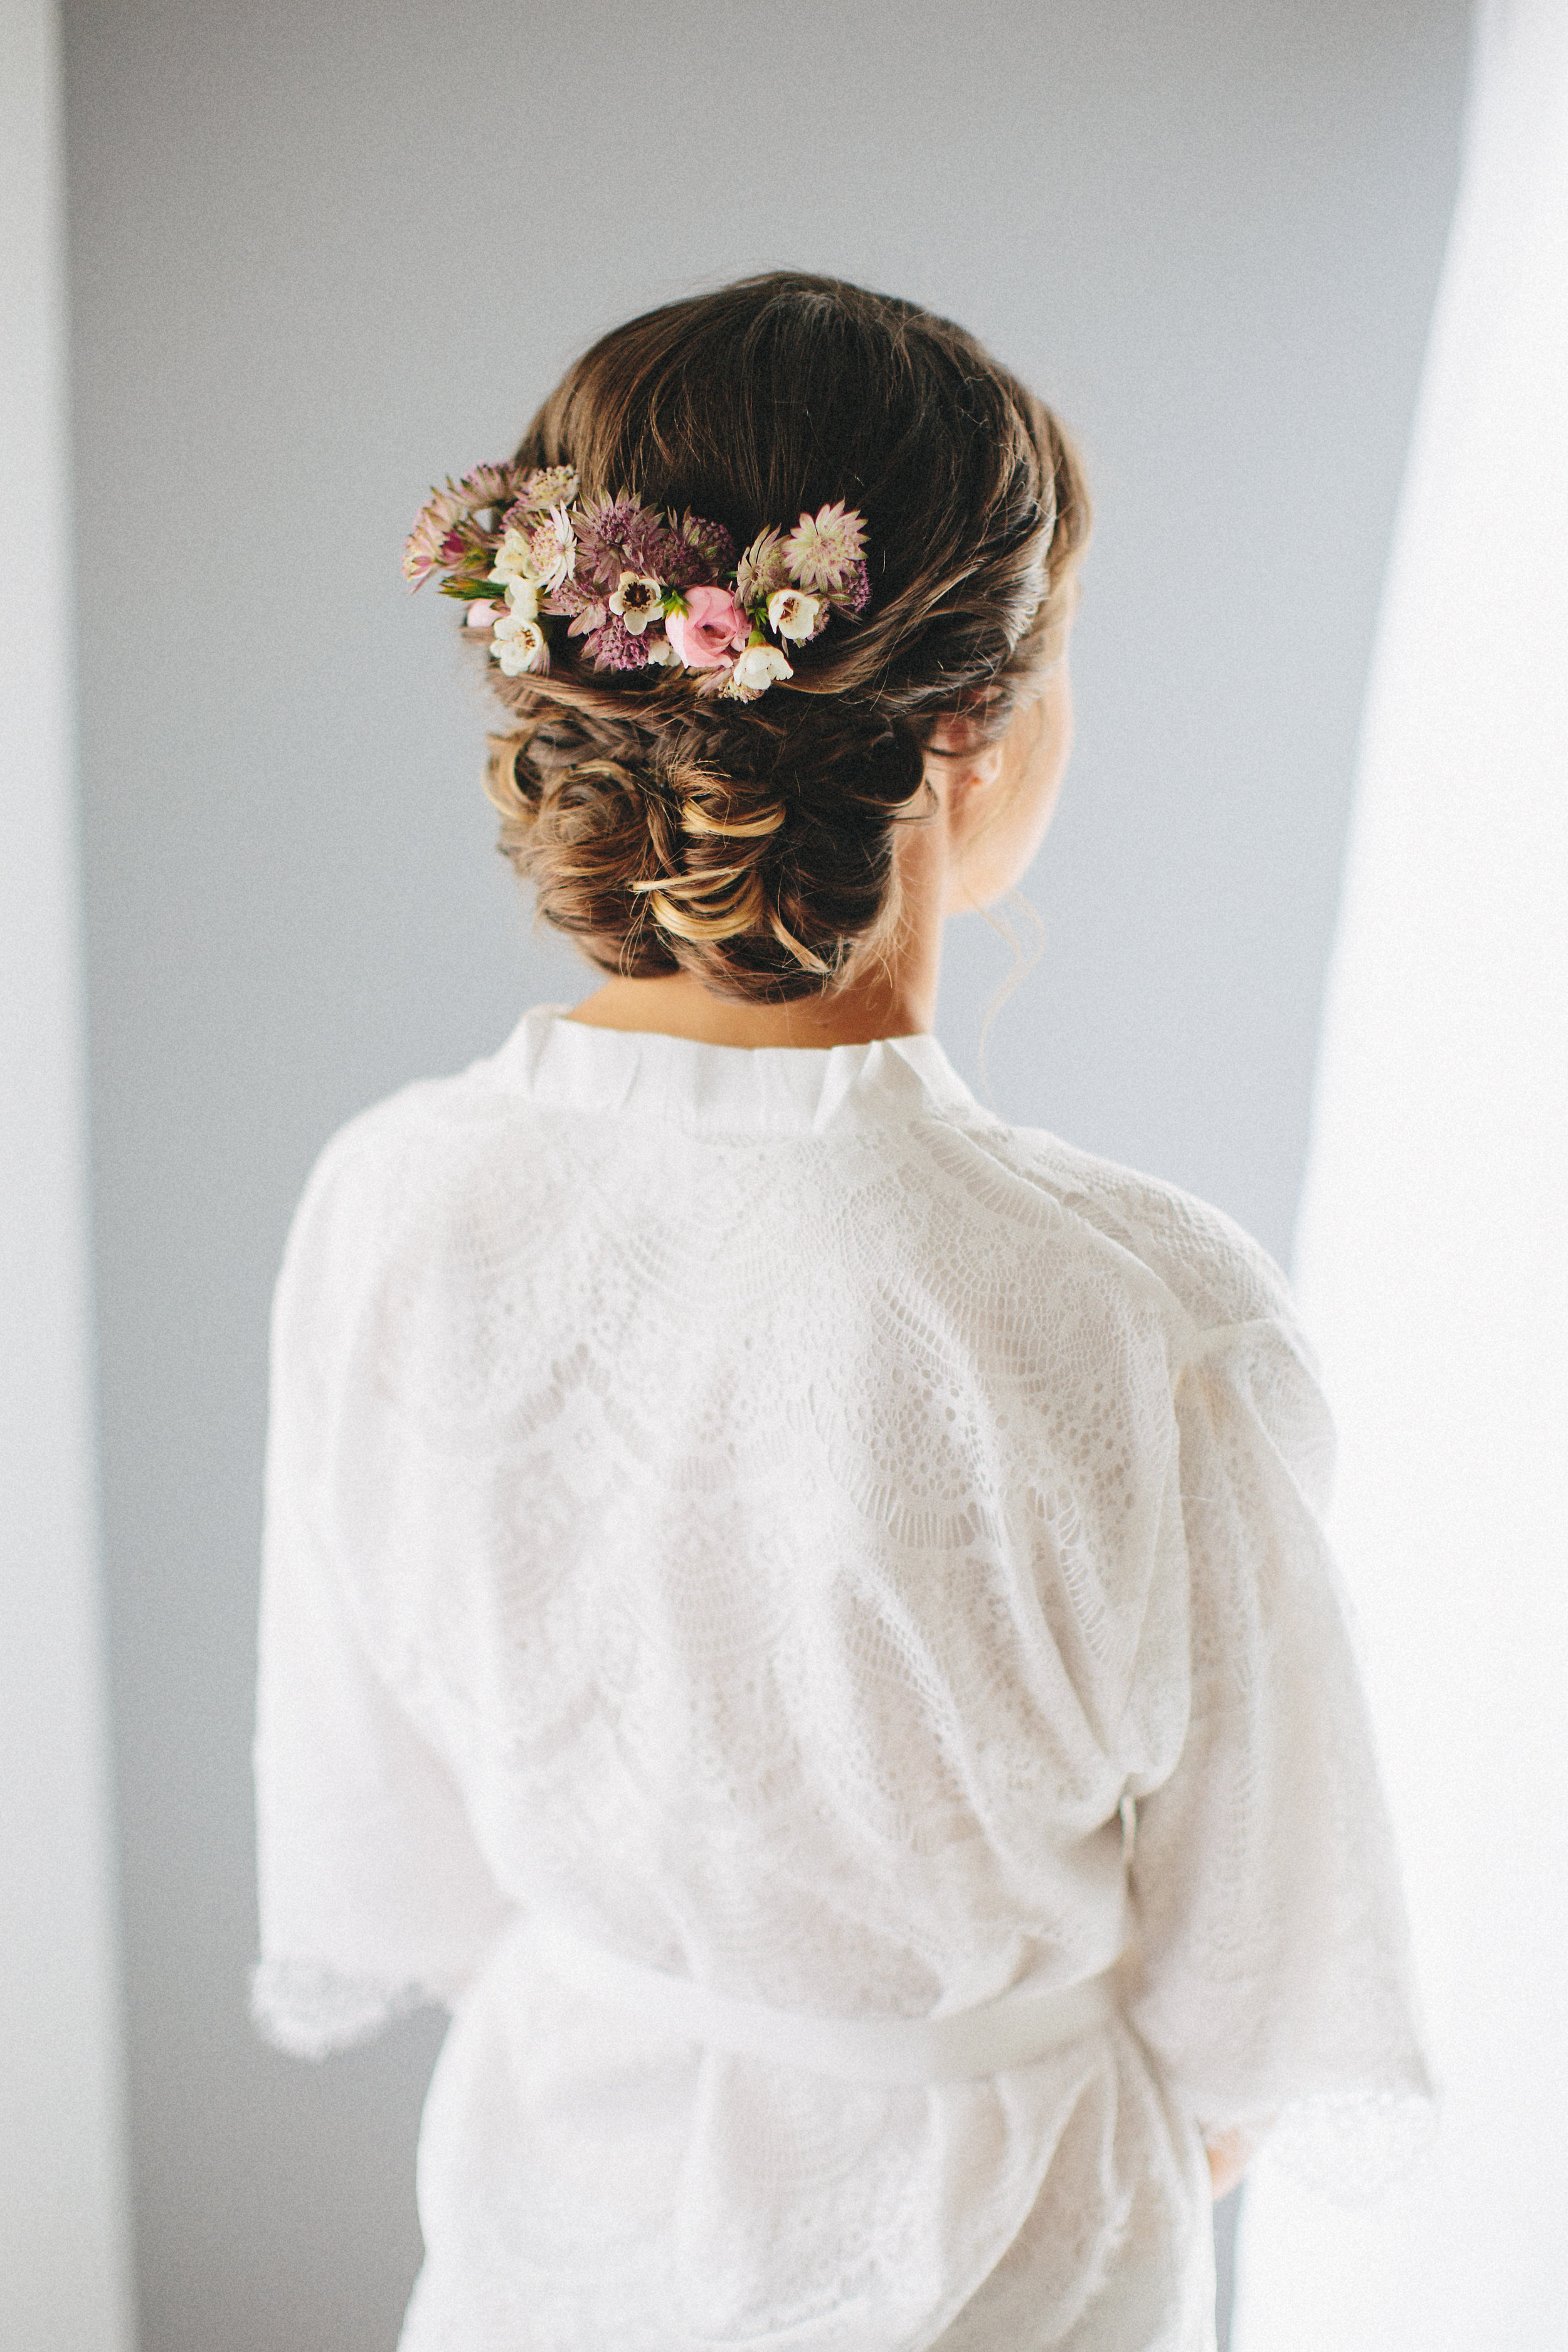 Wedding Updo from Behind with Flowers and Bride Wearing Robe. Bridal hair and makeup by Vanity Belle in Orange County (Costa Mesa) and San Diego (La Jolla)